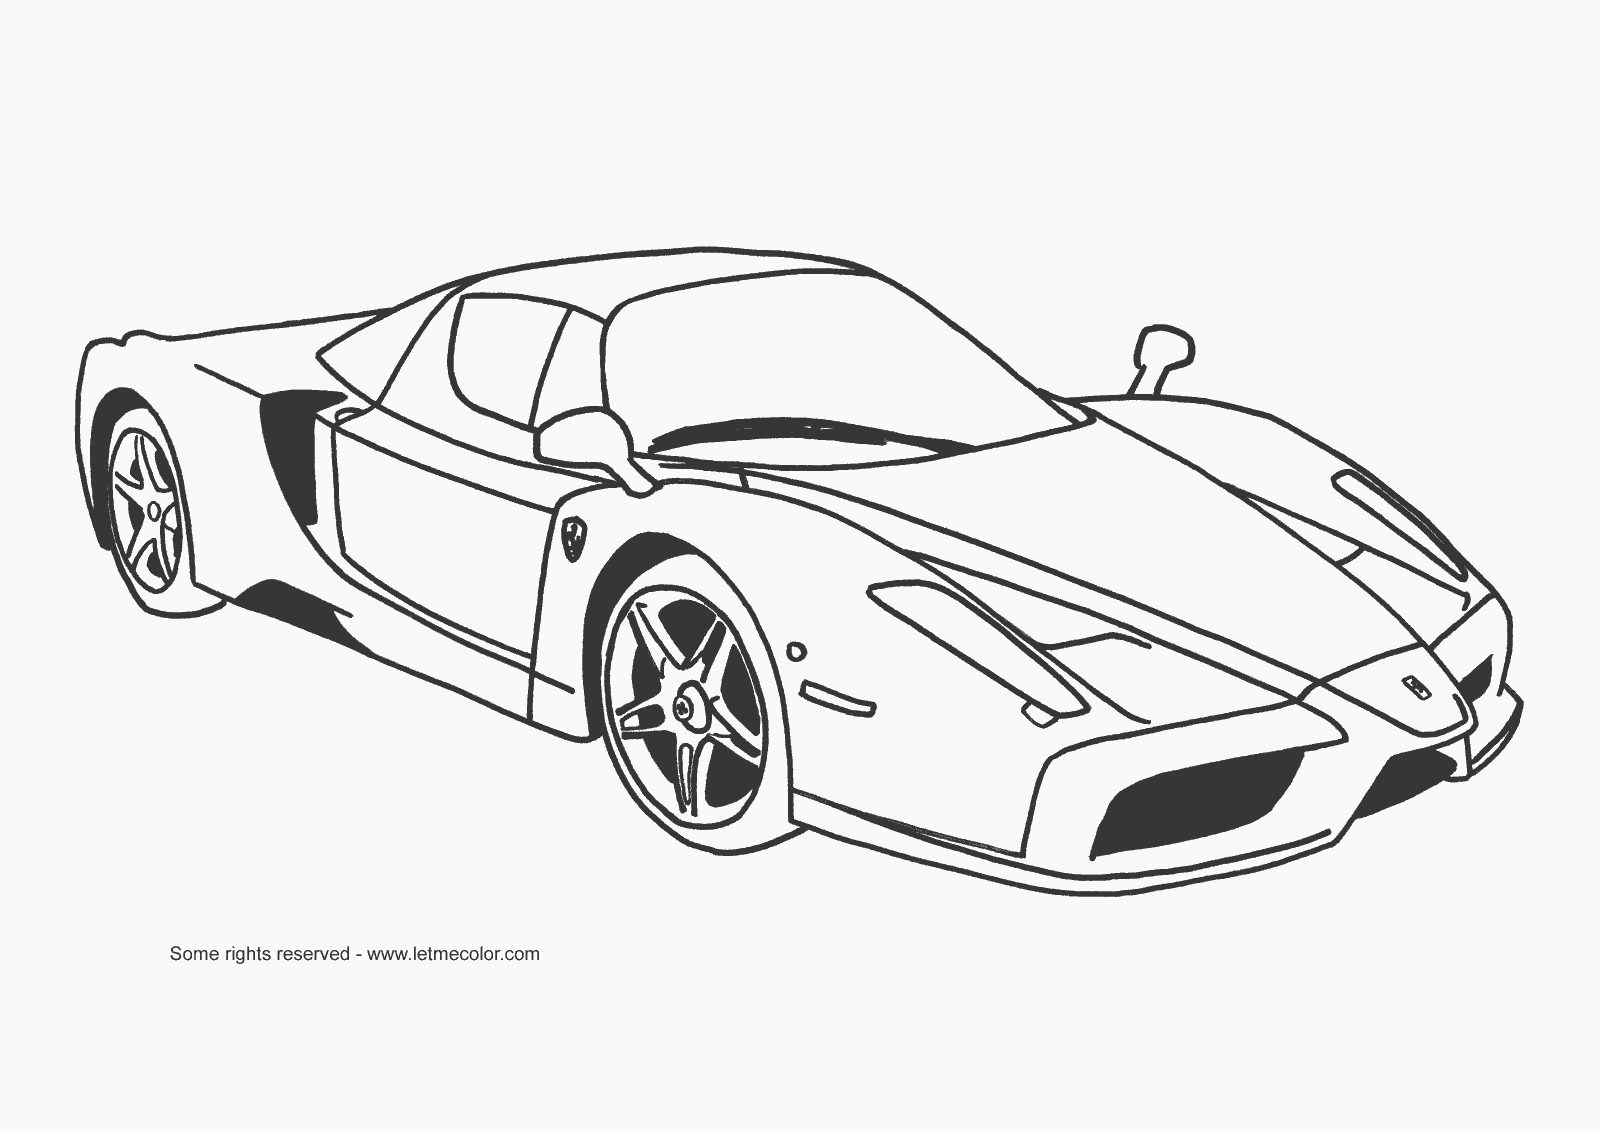 Cars coloring pages | online coloring pages disney | printable coloring pages for kids | #24